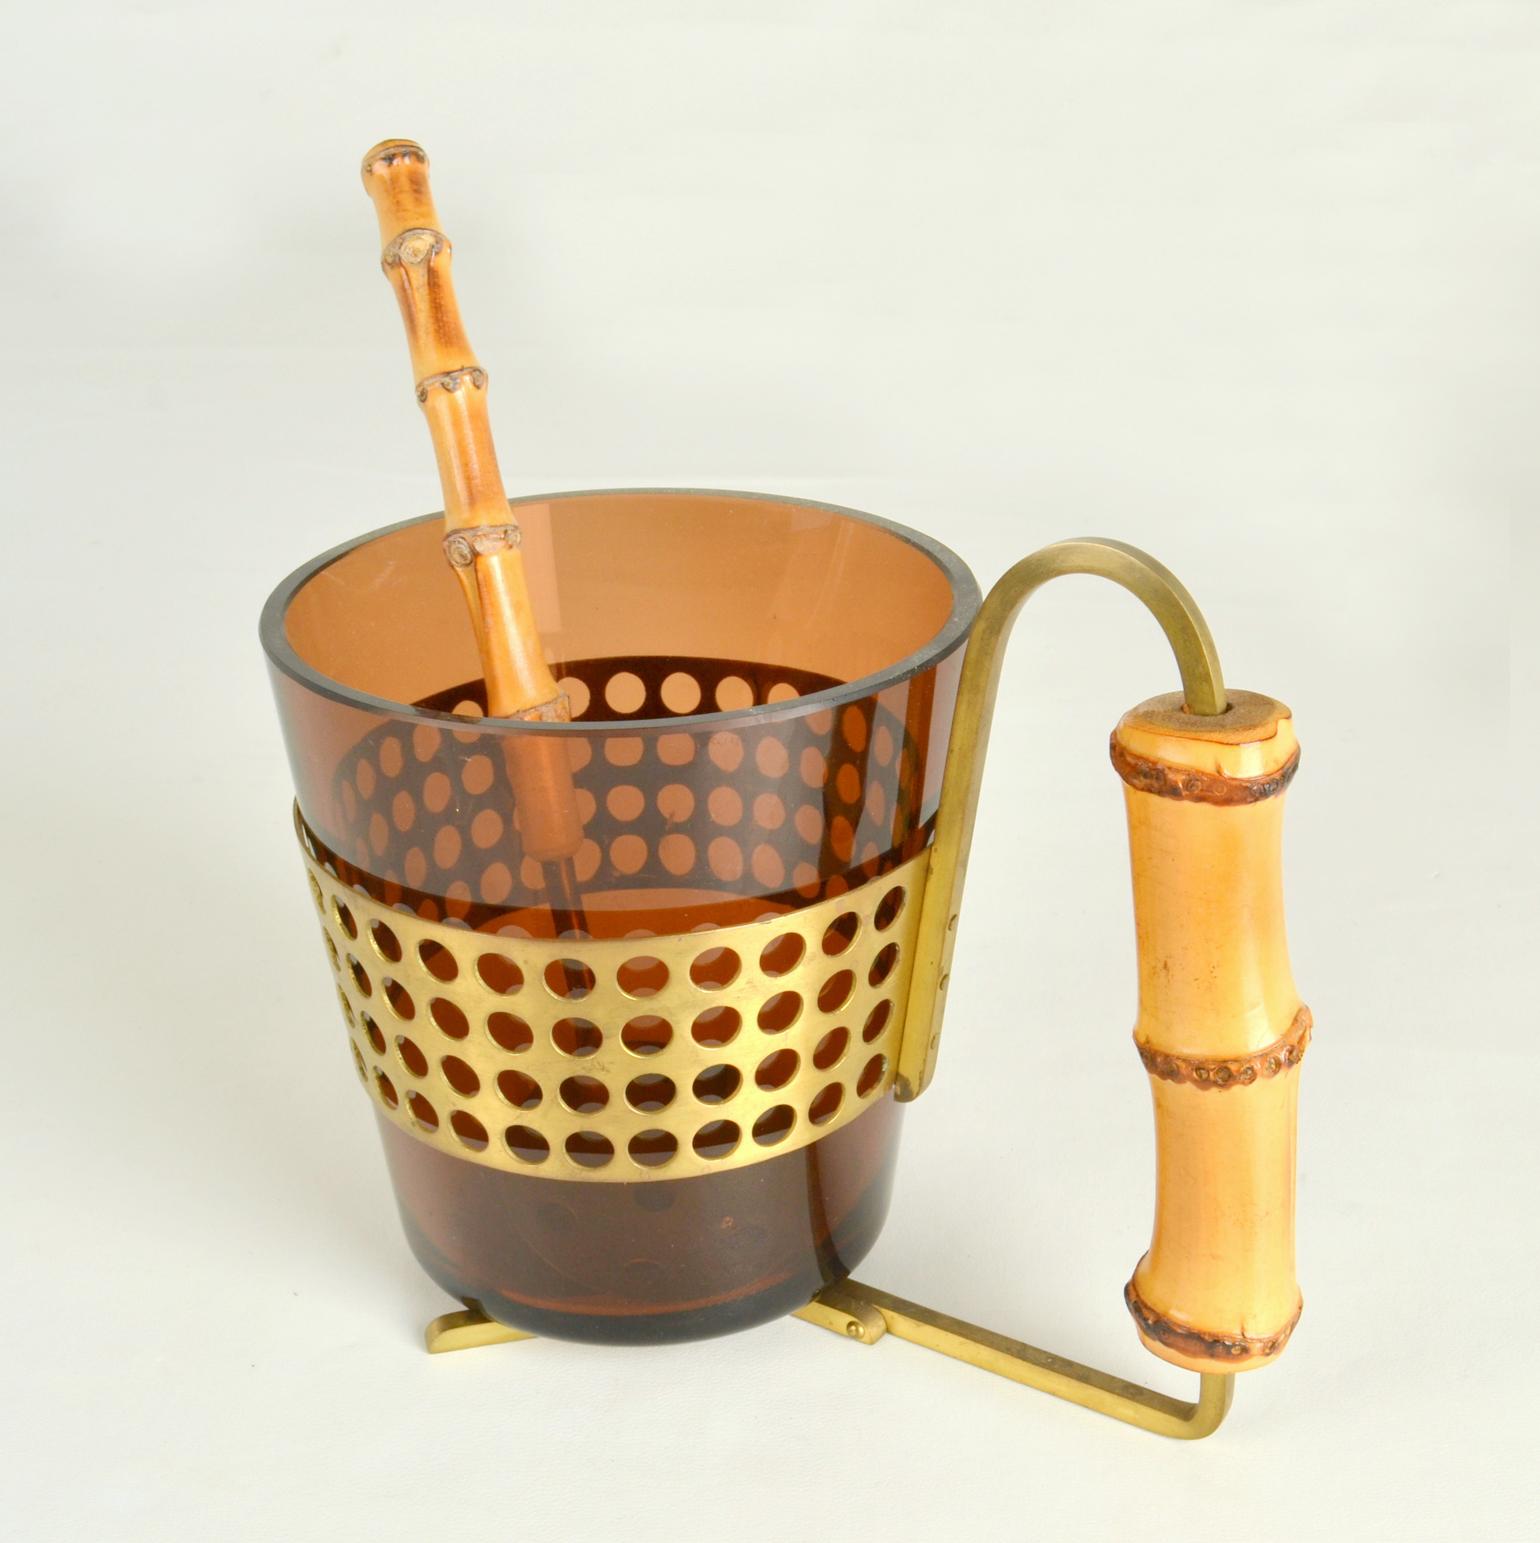 Elegant ice bucket for barware in Murano blown glass, brass and bamboo with matching spoon in brass with bamboo handle.
Dimensions Spoon; 21 x 5.5 x 3 cm.
Dimensions Glass container; D 12 x H 12 cm.